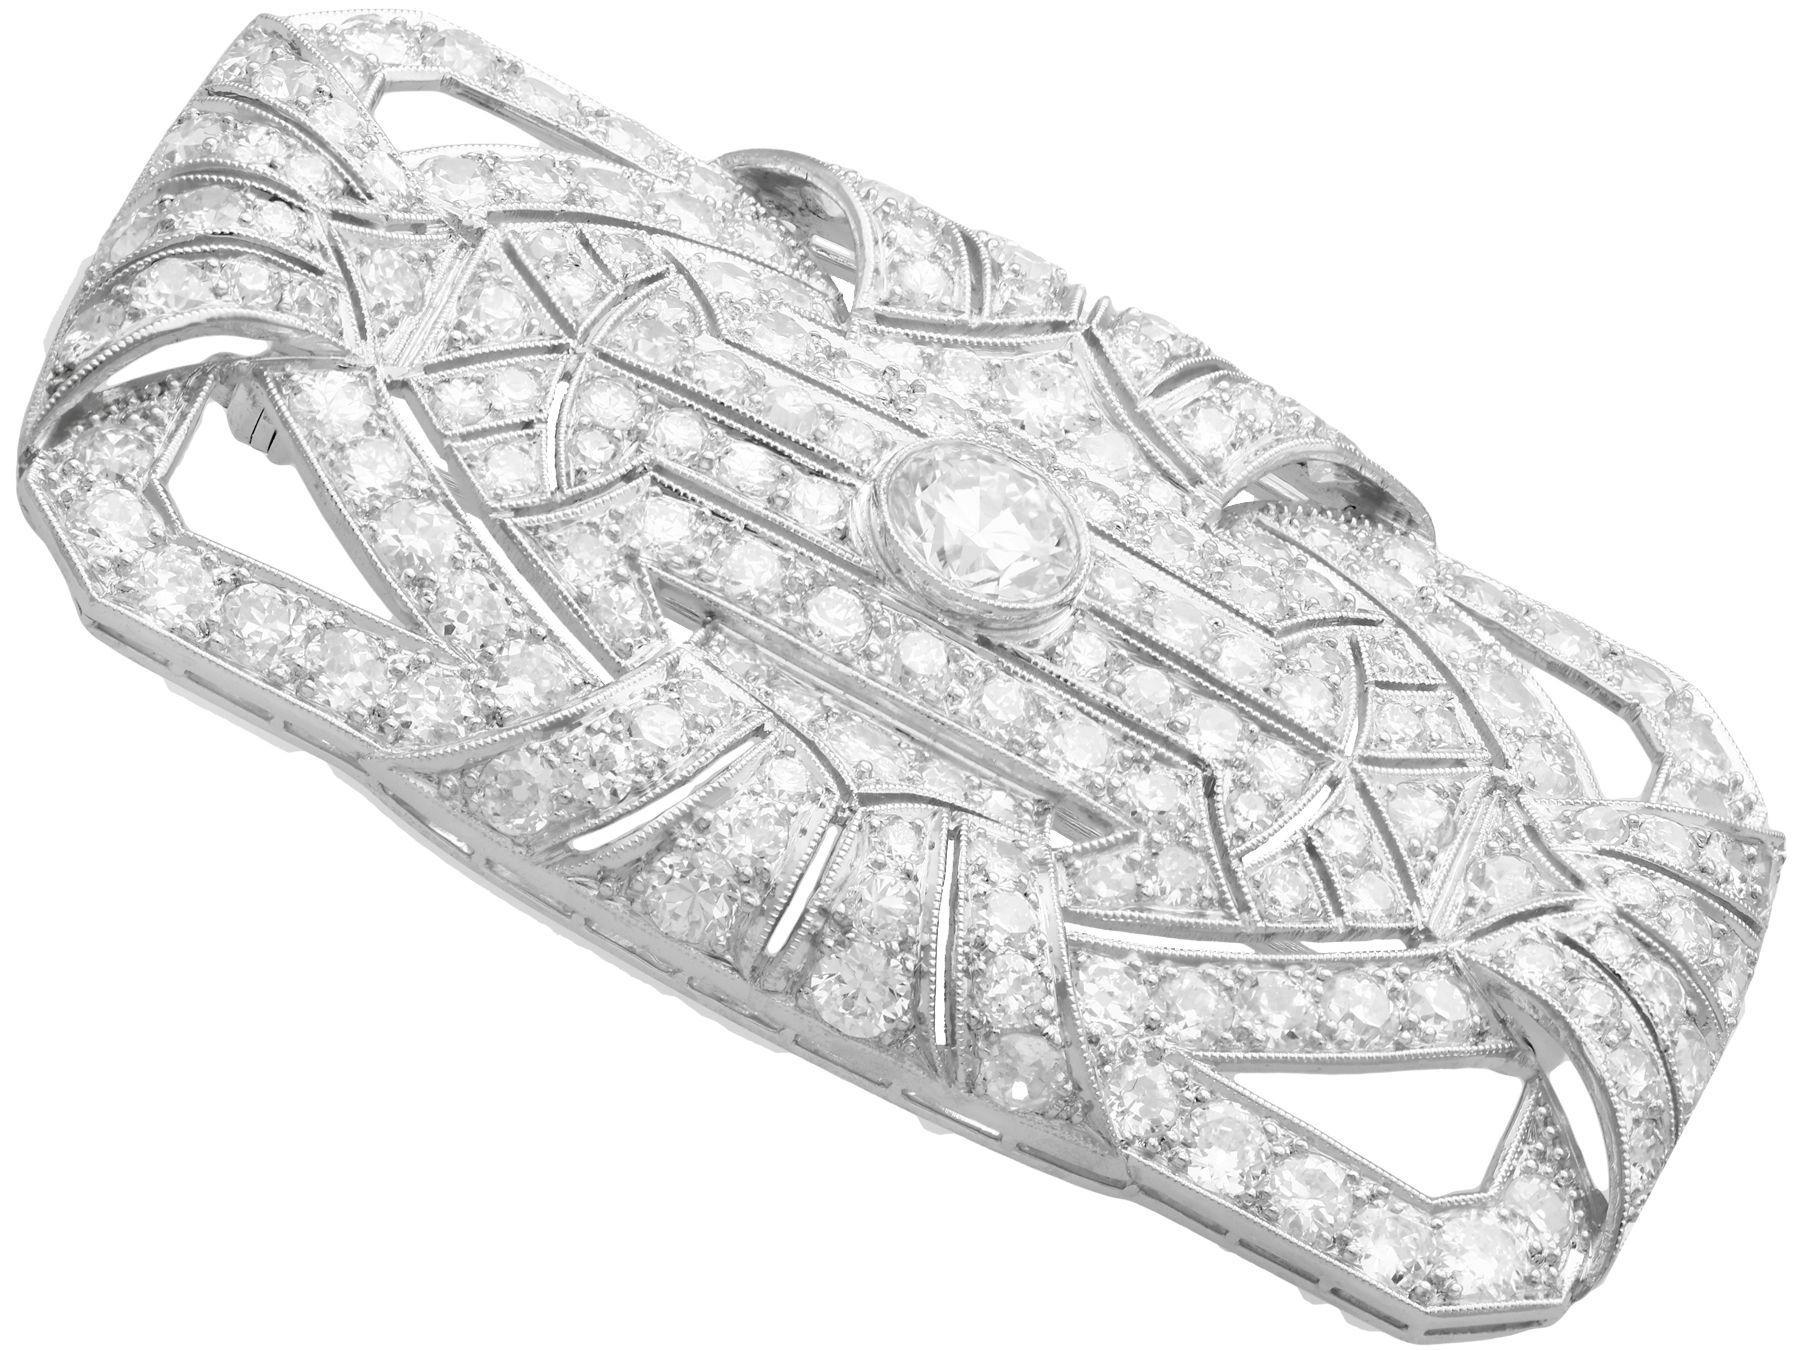 Art Deco 8.13 Carat Diamond and Platinum Brooch In Excellent Condition For Sale In Jesmond, Newcastle Upon Tyne